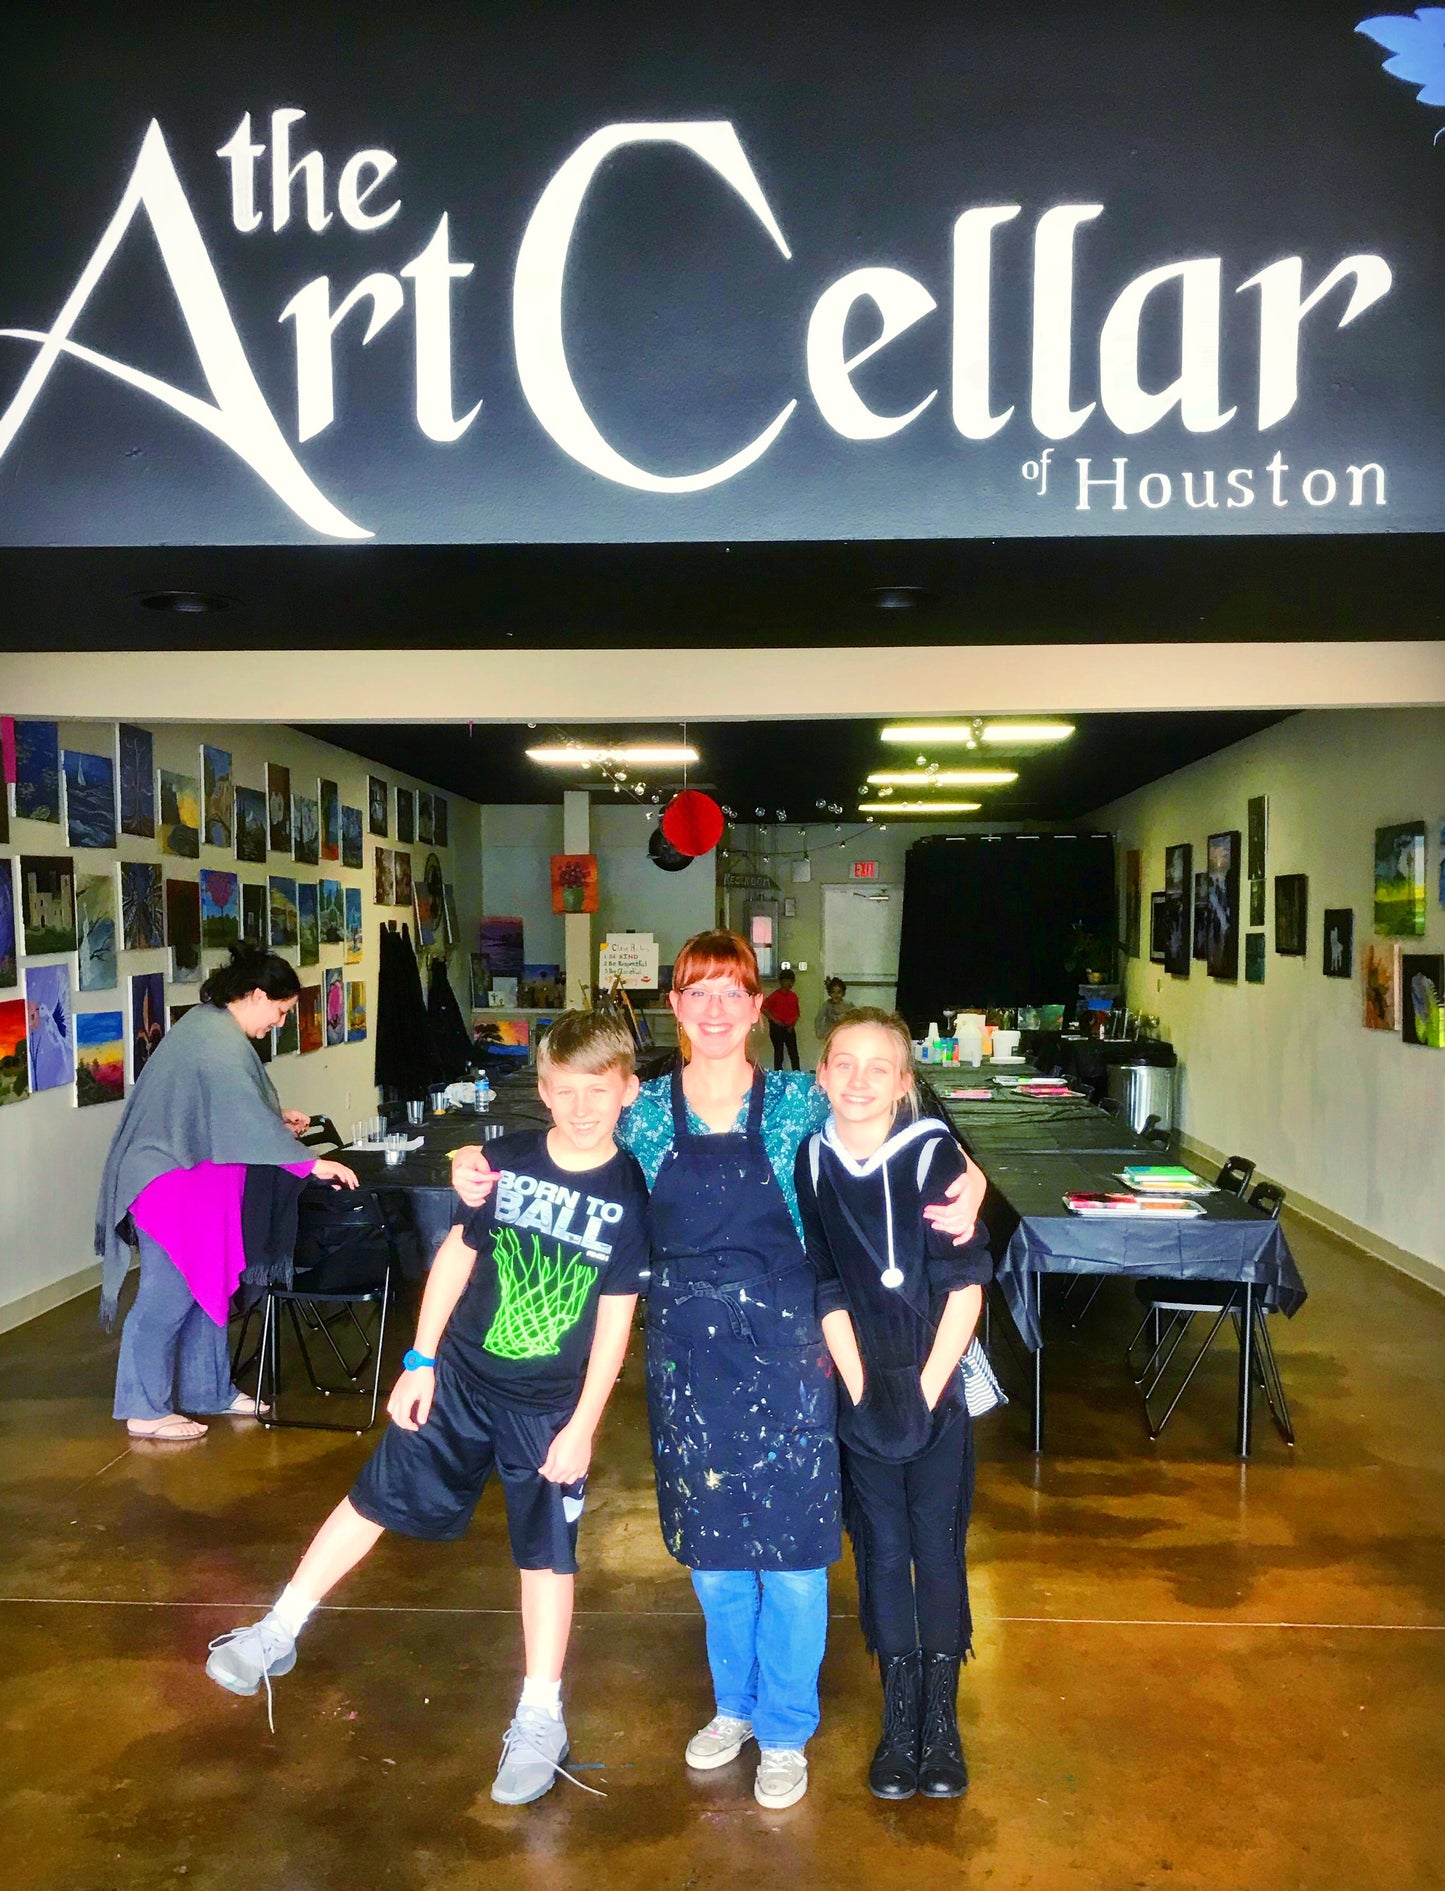 Sat, Jul 17, 10a-12p "Outer Space" Private Houston Kids Painting Party